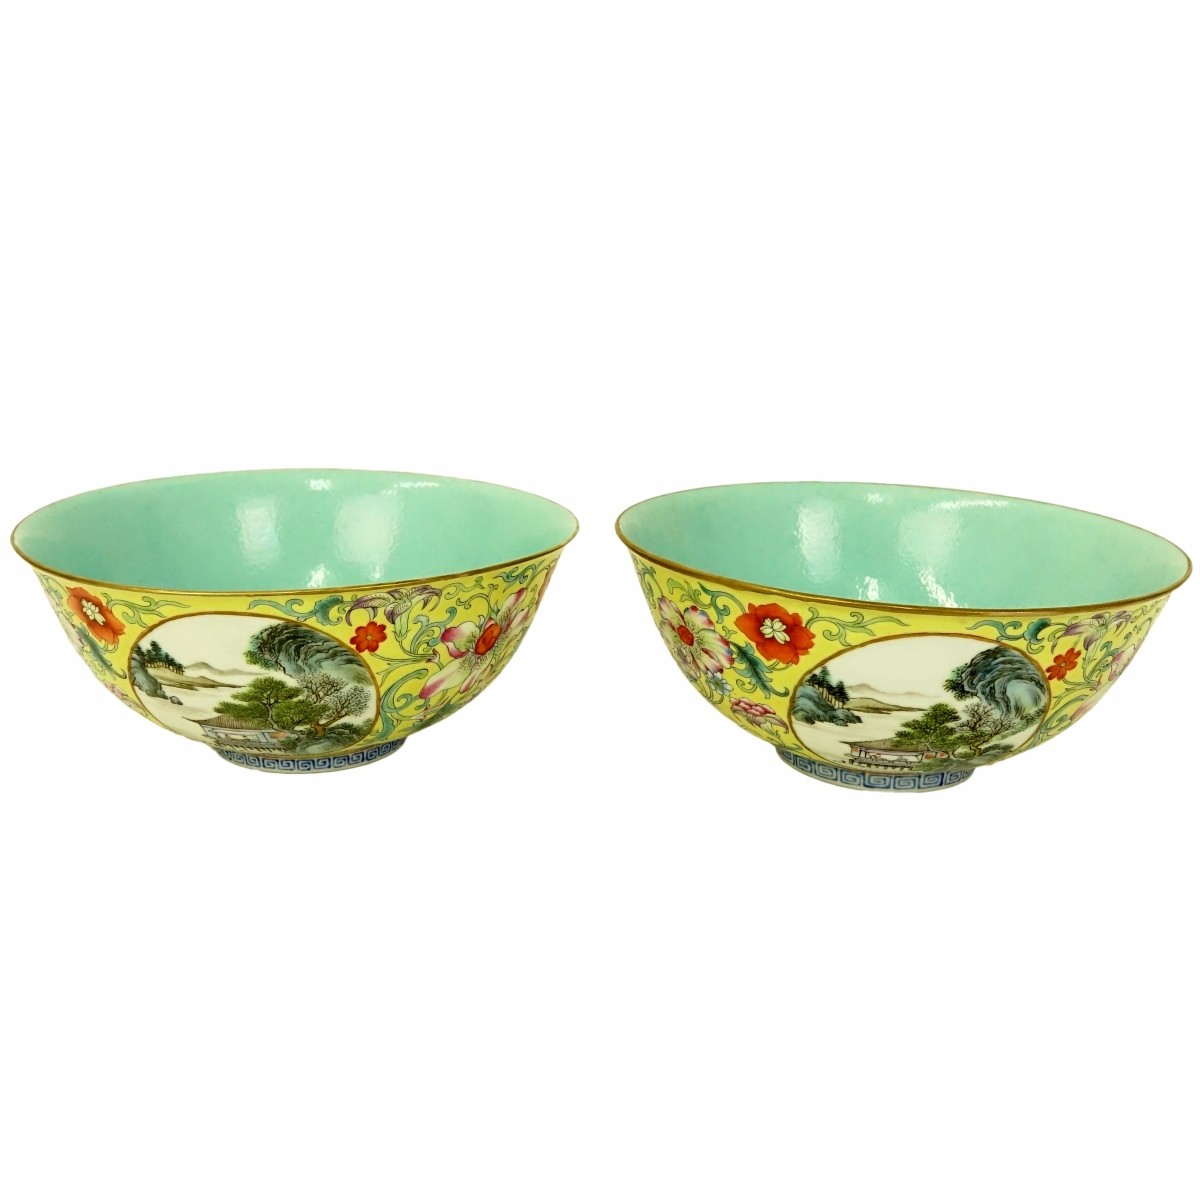 Pair of Early 20th C. Chinese Famille Rose Bowls